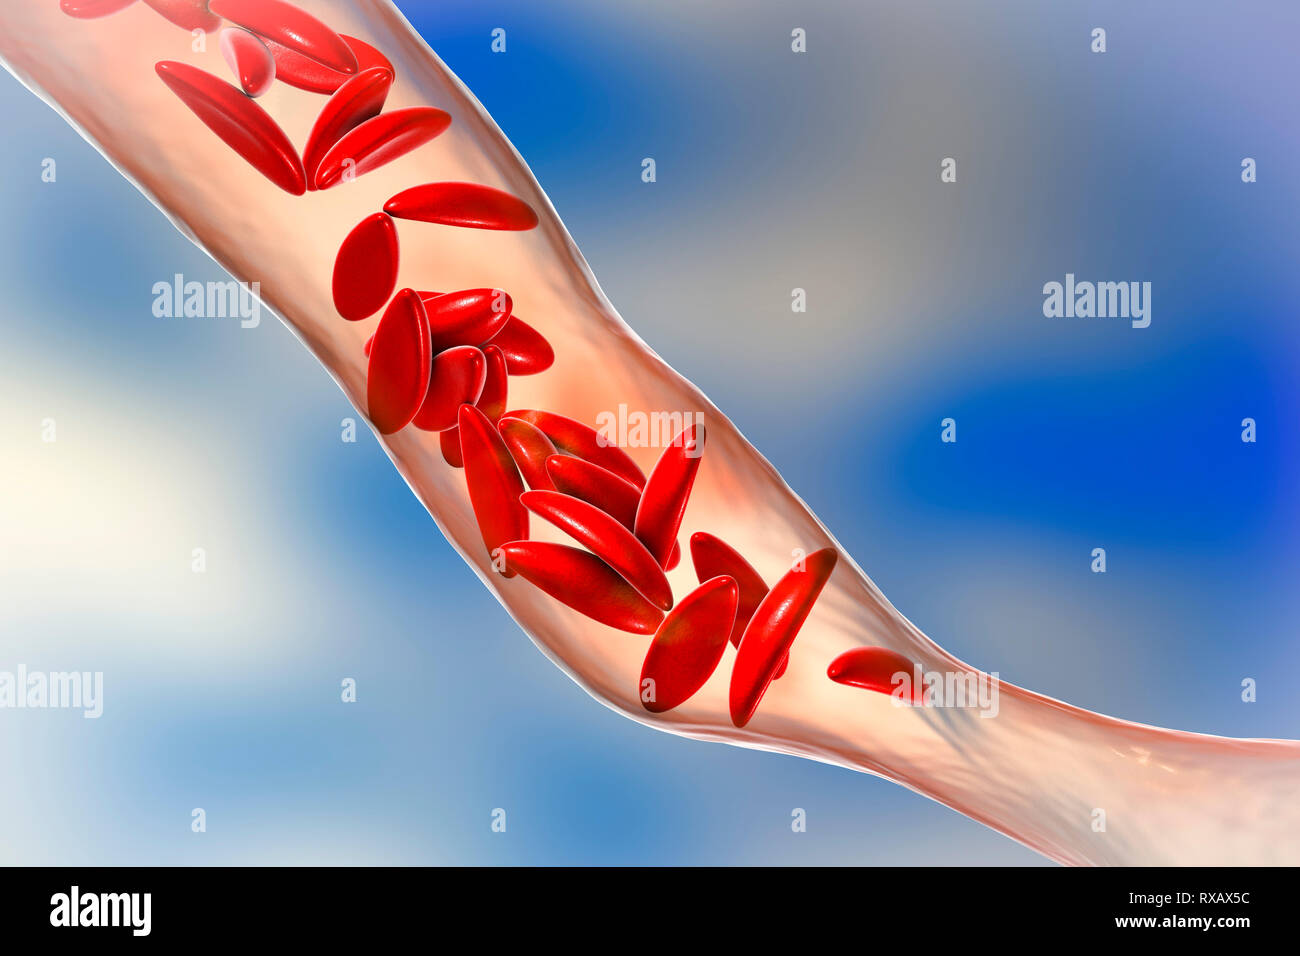 Blood vessel blocked in sickle cell anaemia, illustration Stock Photo